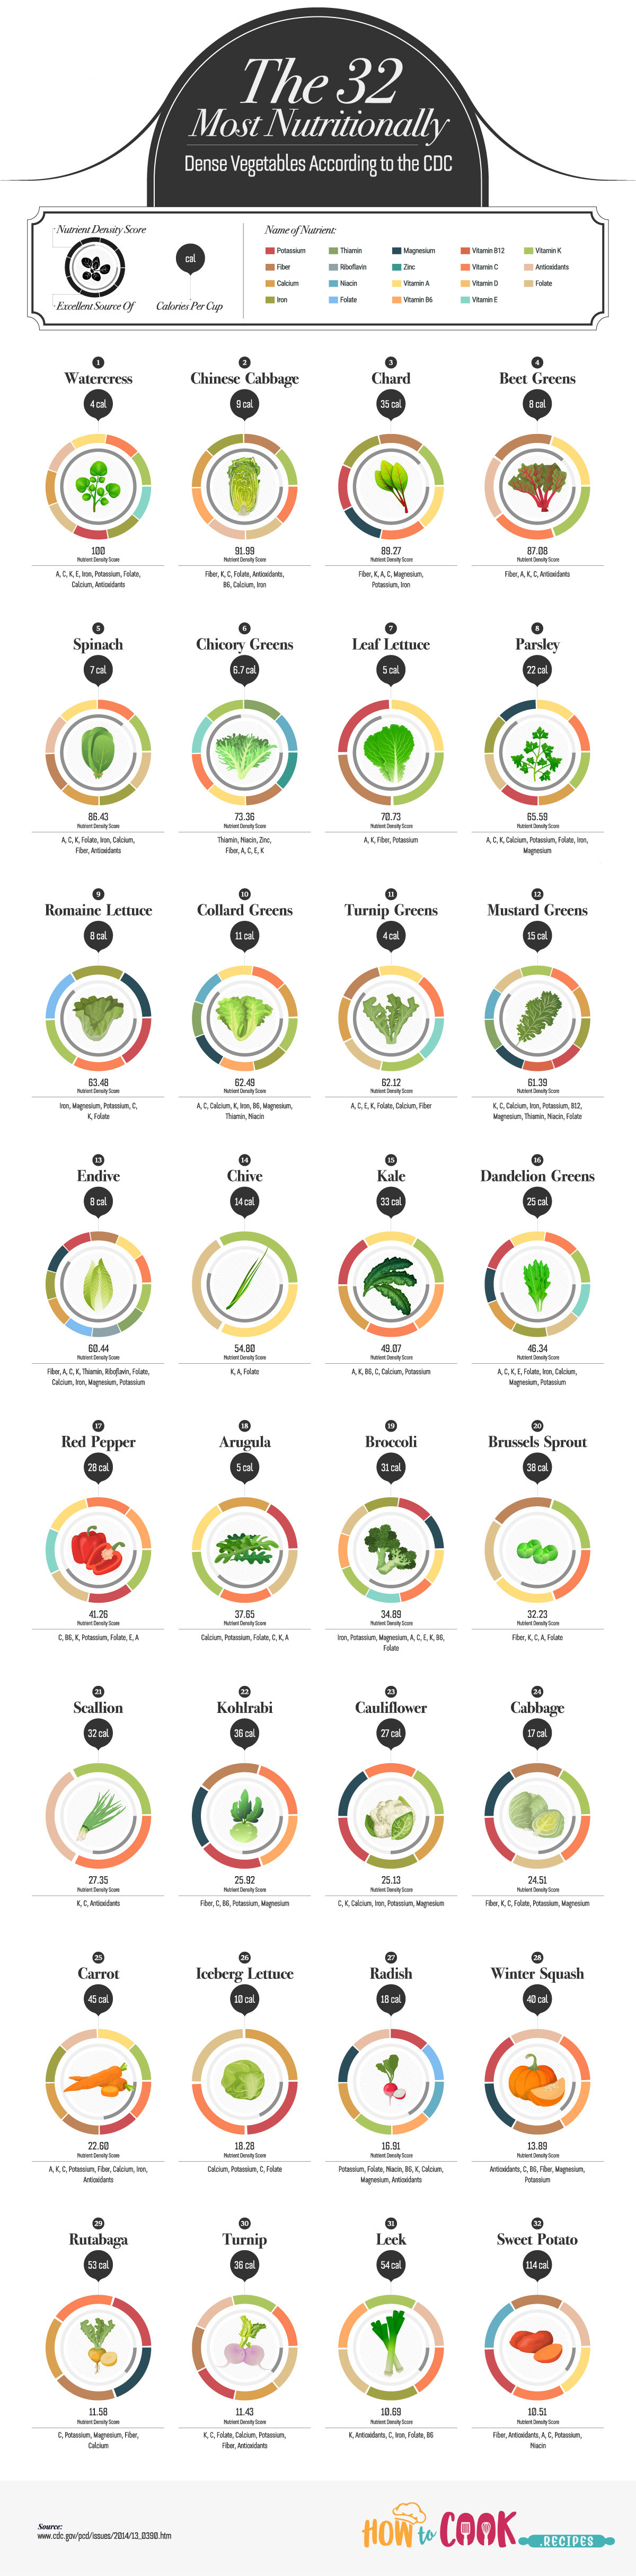 The 32 Most Nutritionally Dense Vegetables According to the CDC